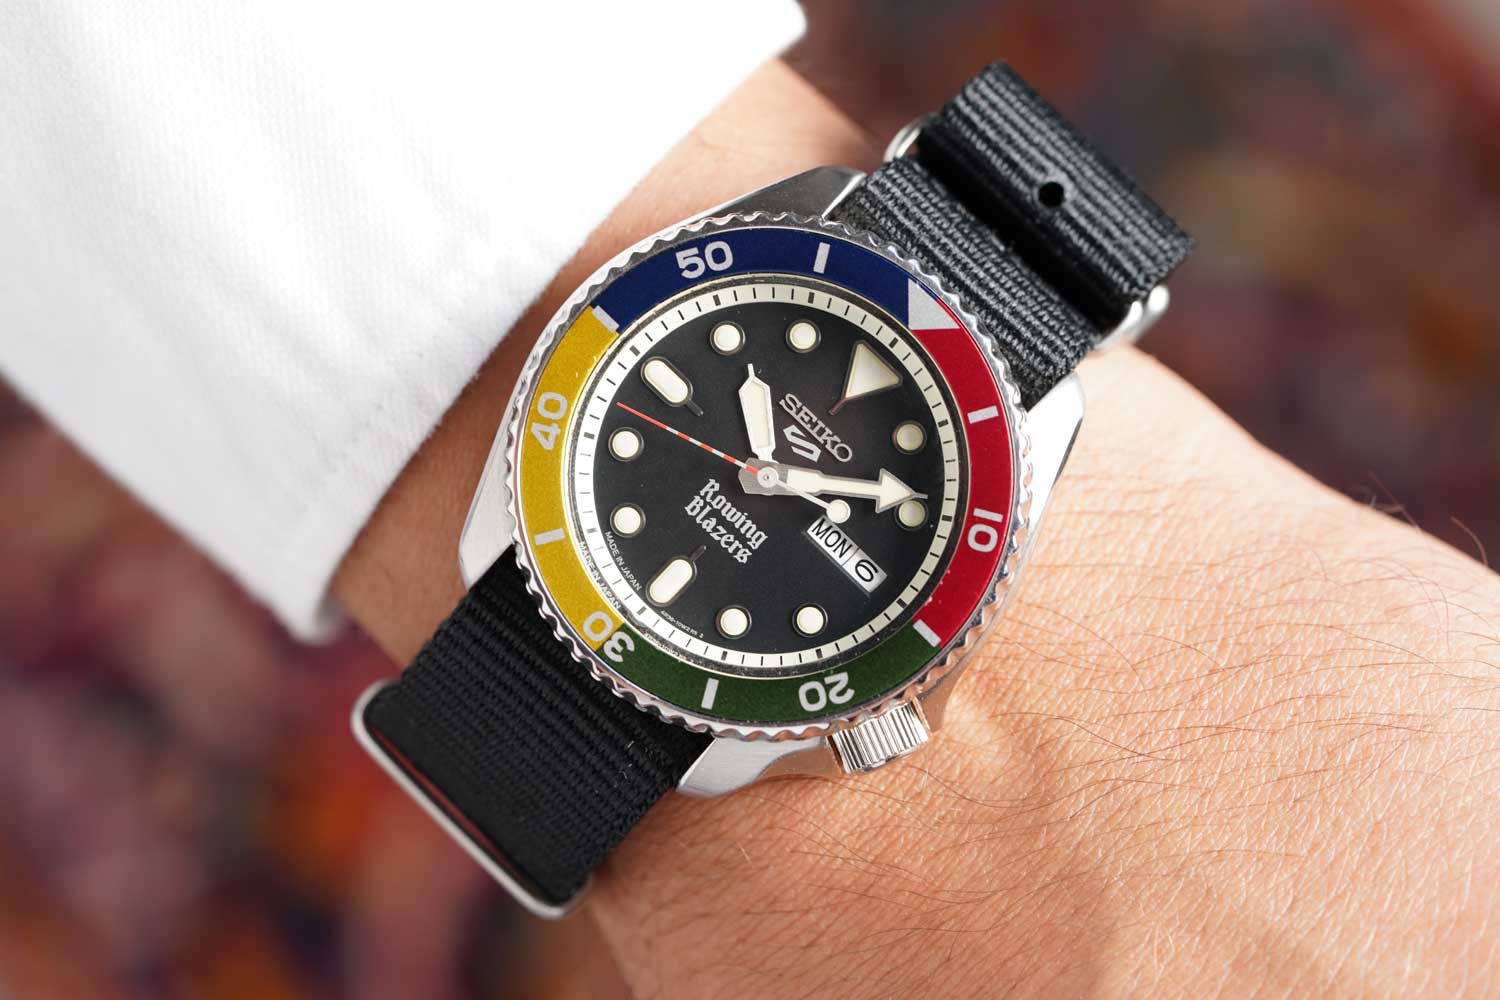 The four color colorblock bezel brings a retro vibe to an already cherished watch design.